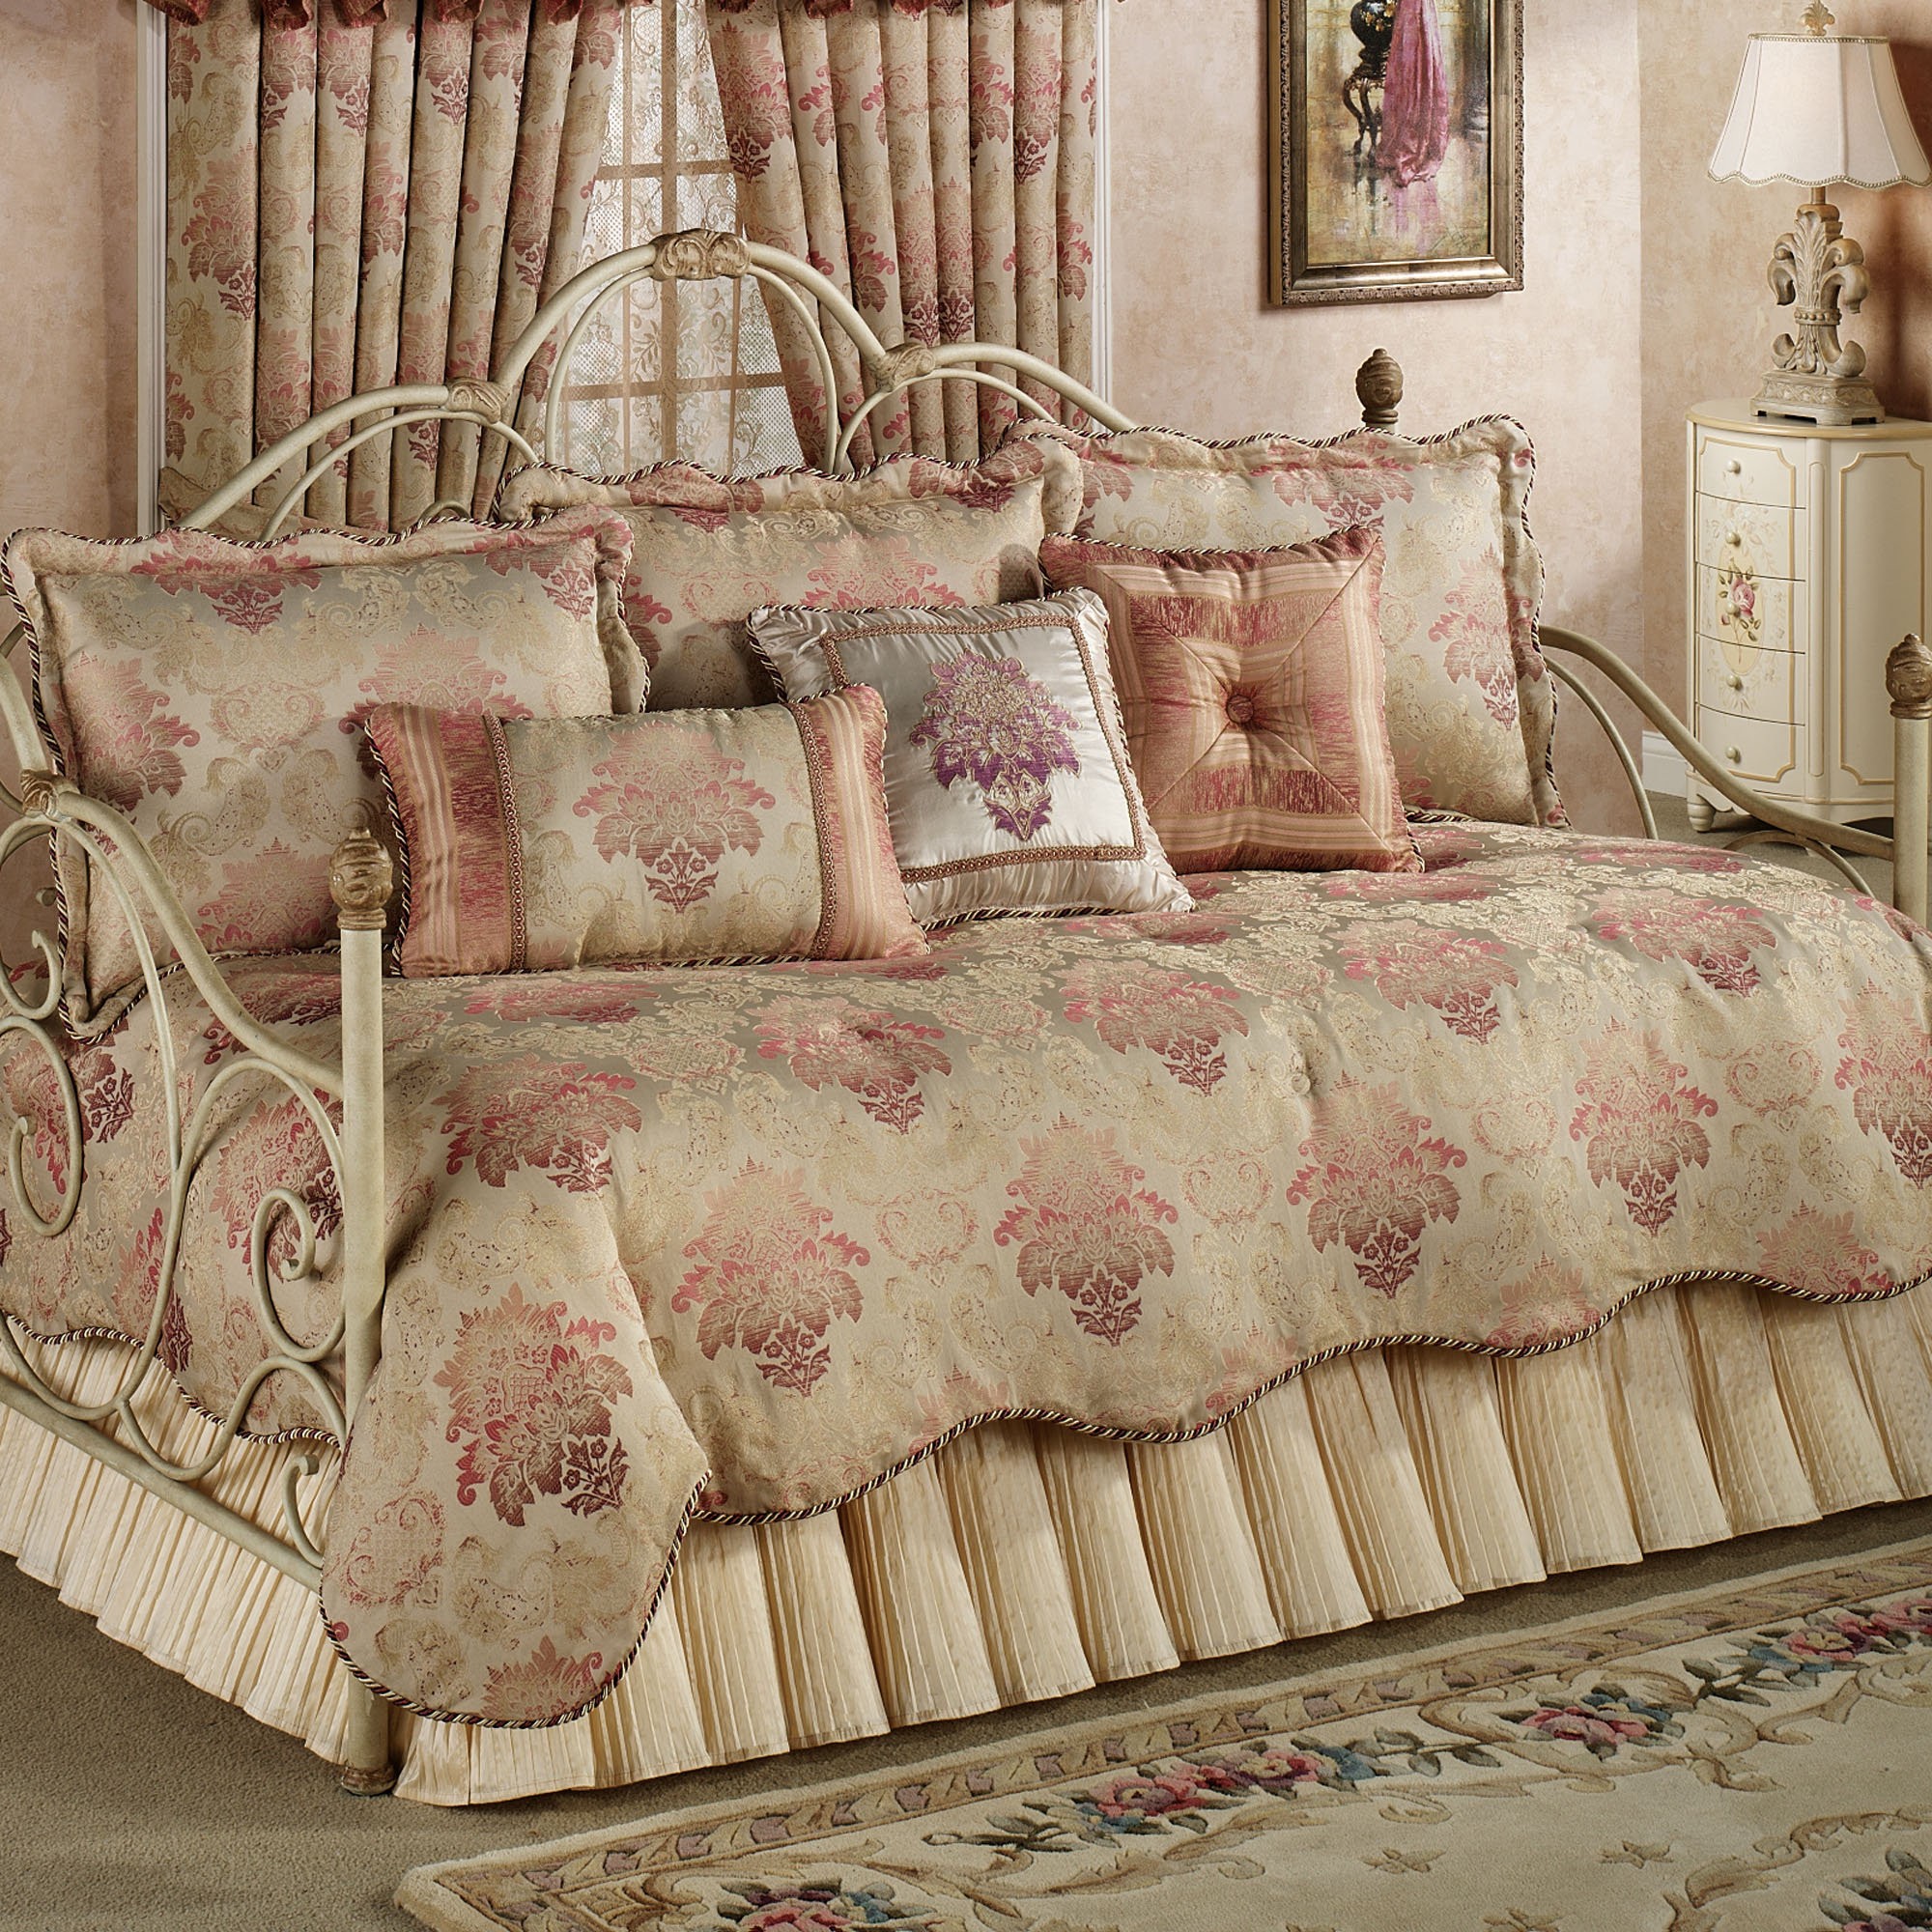 Daybed bedding sets clearance 20 attributions to the 15